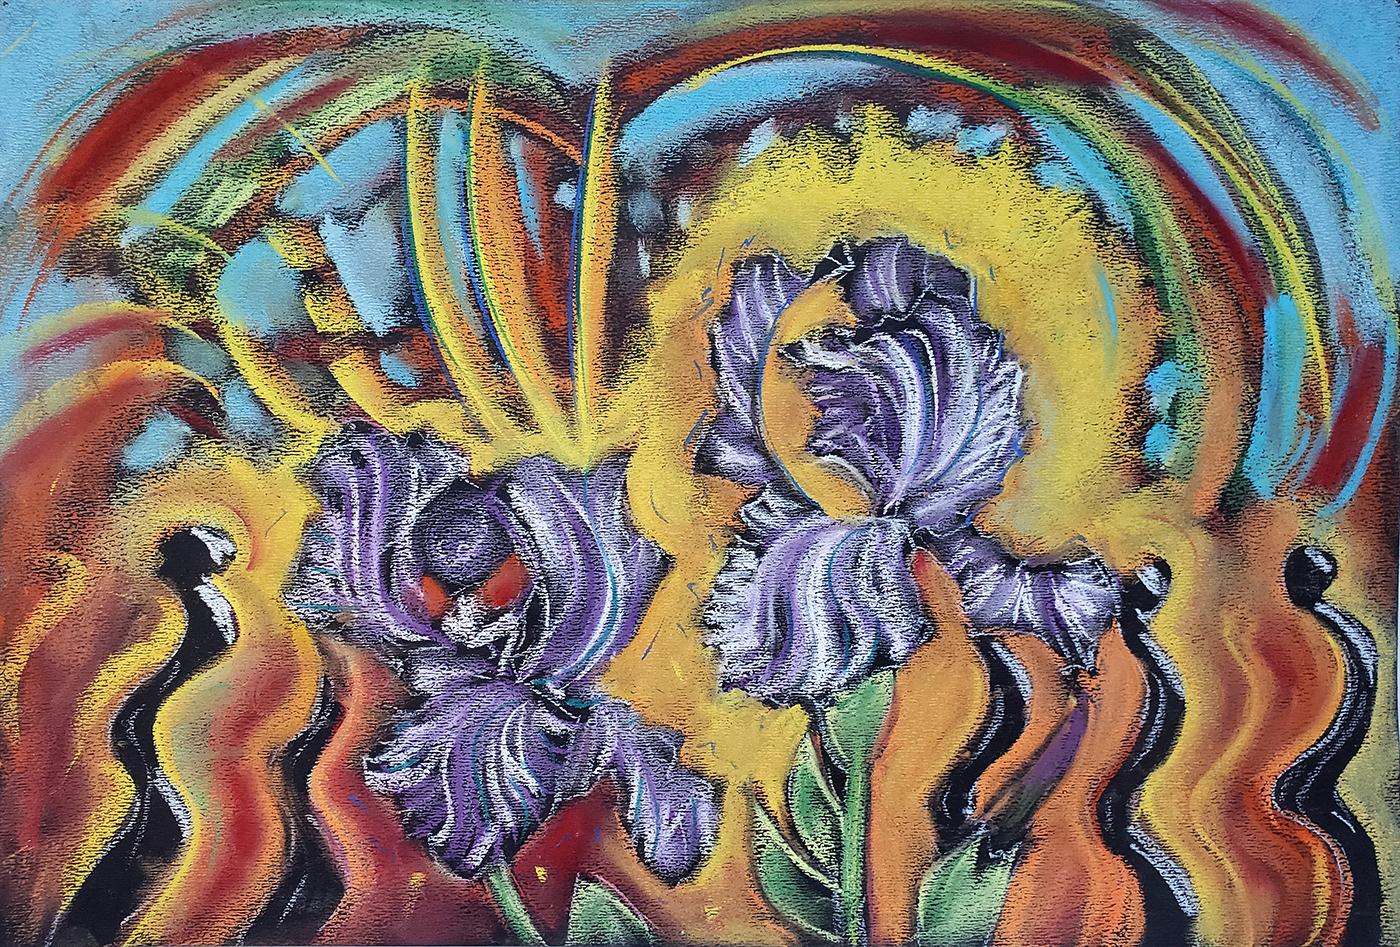 Secret Garden, Iris, colorful abstracted floral pastel on dark paper